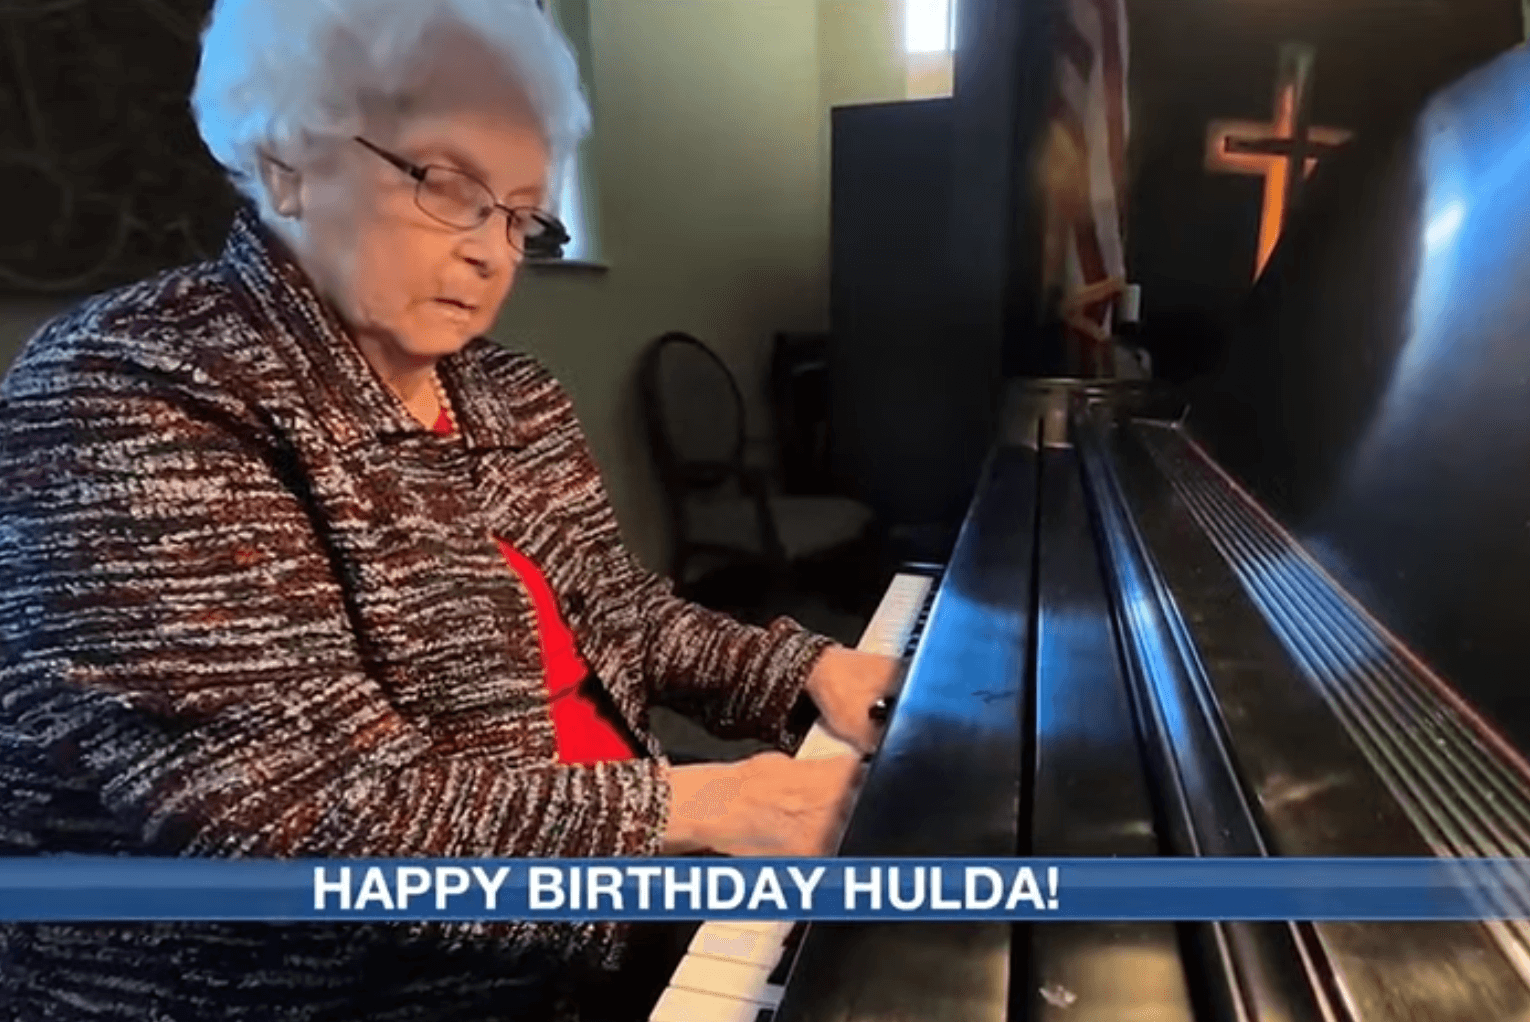 106-Year-Old Woman Points to ‘My Lord’ as ‘Secret’ to Long Life